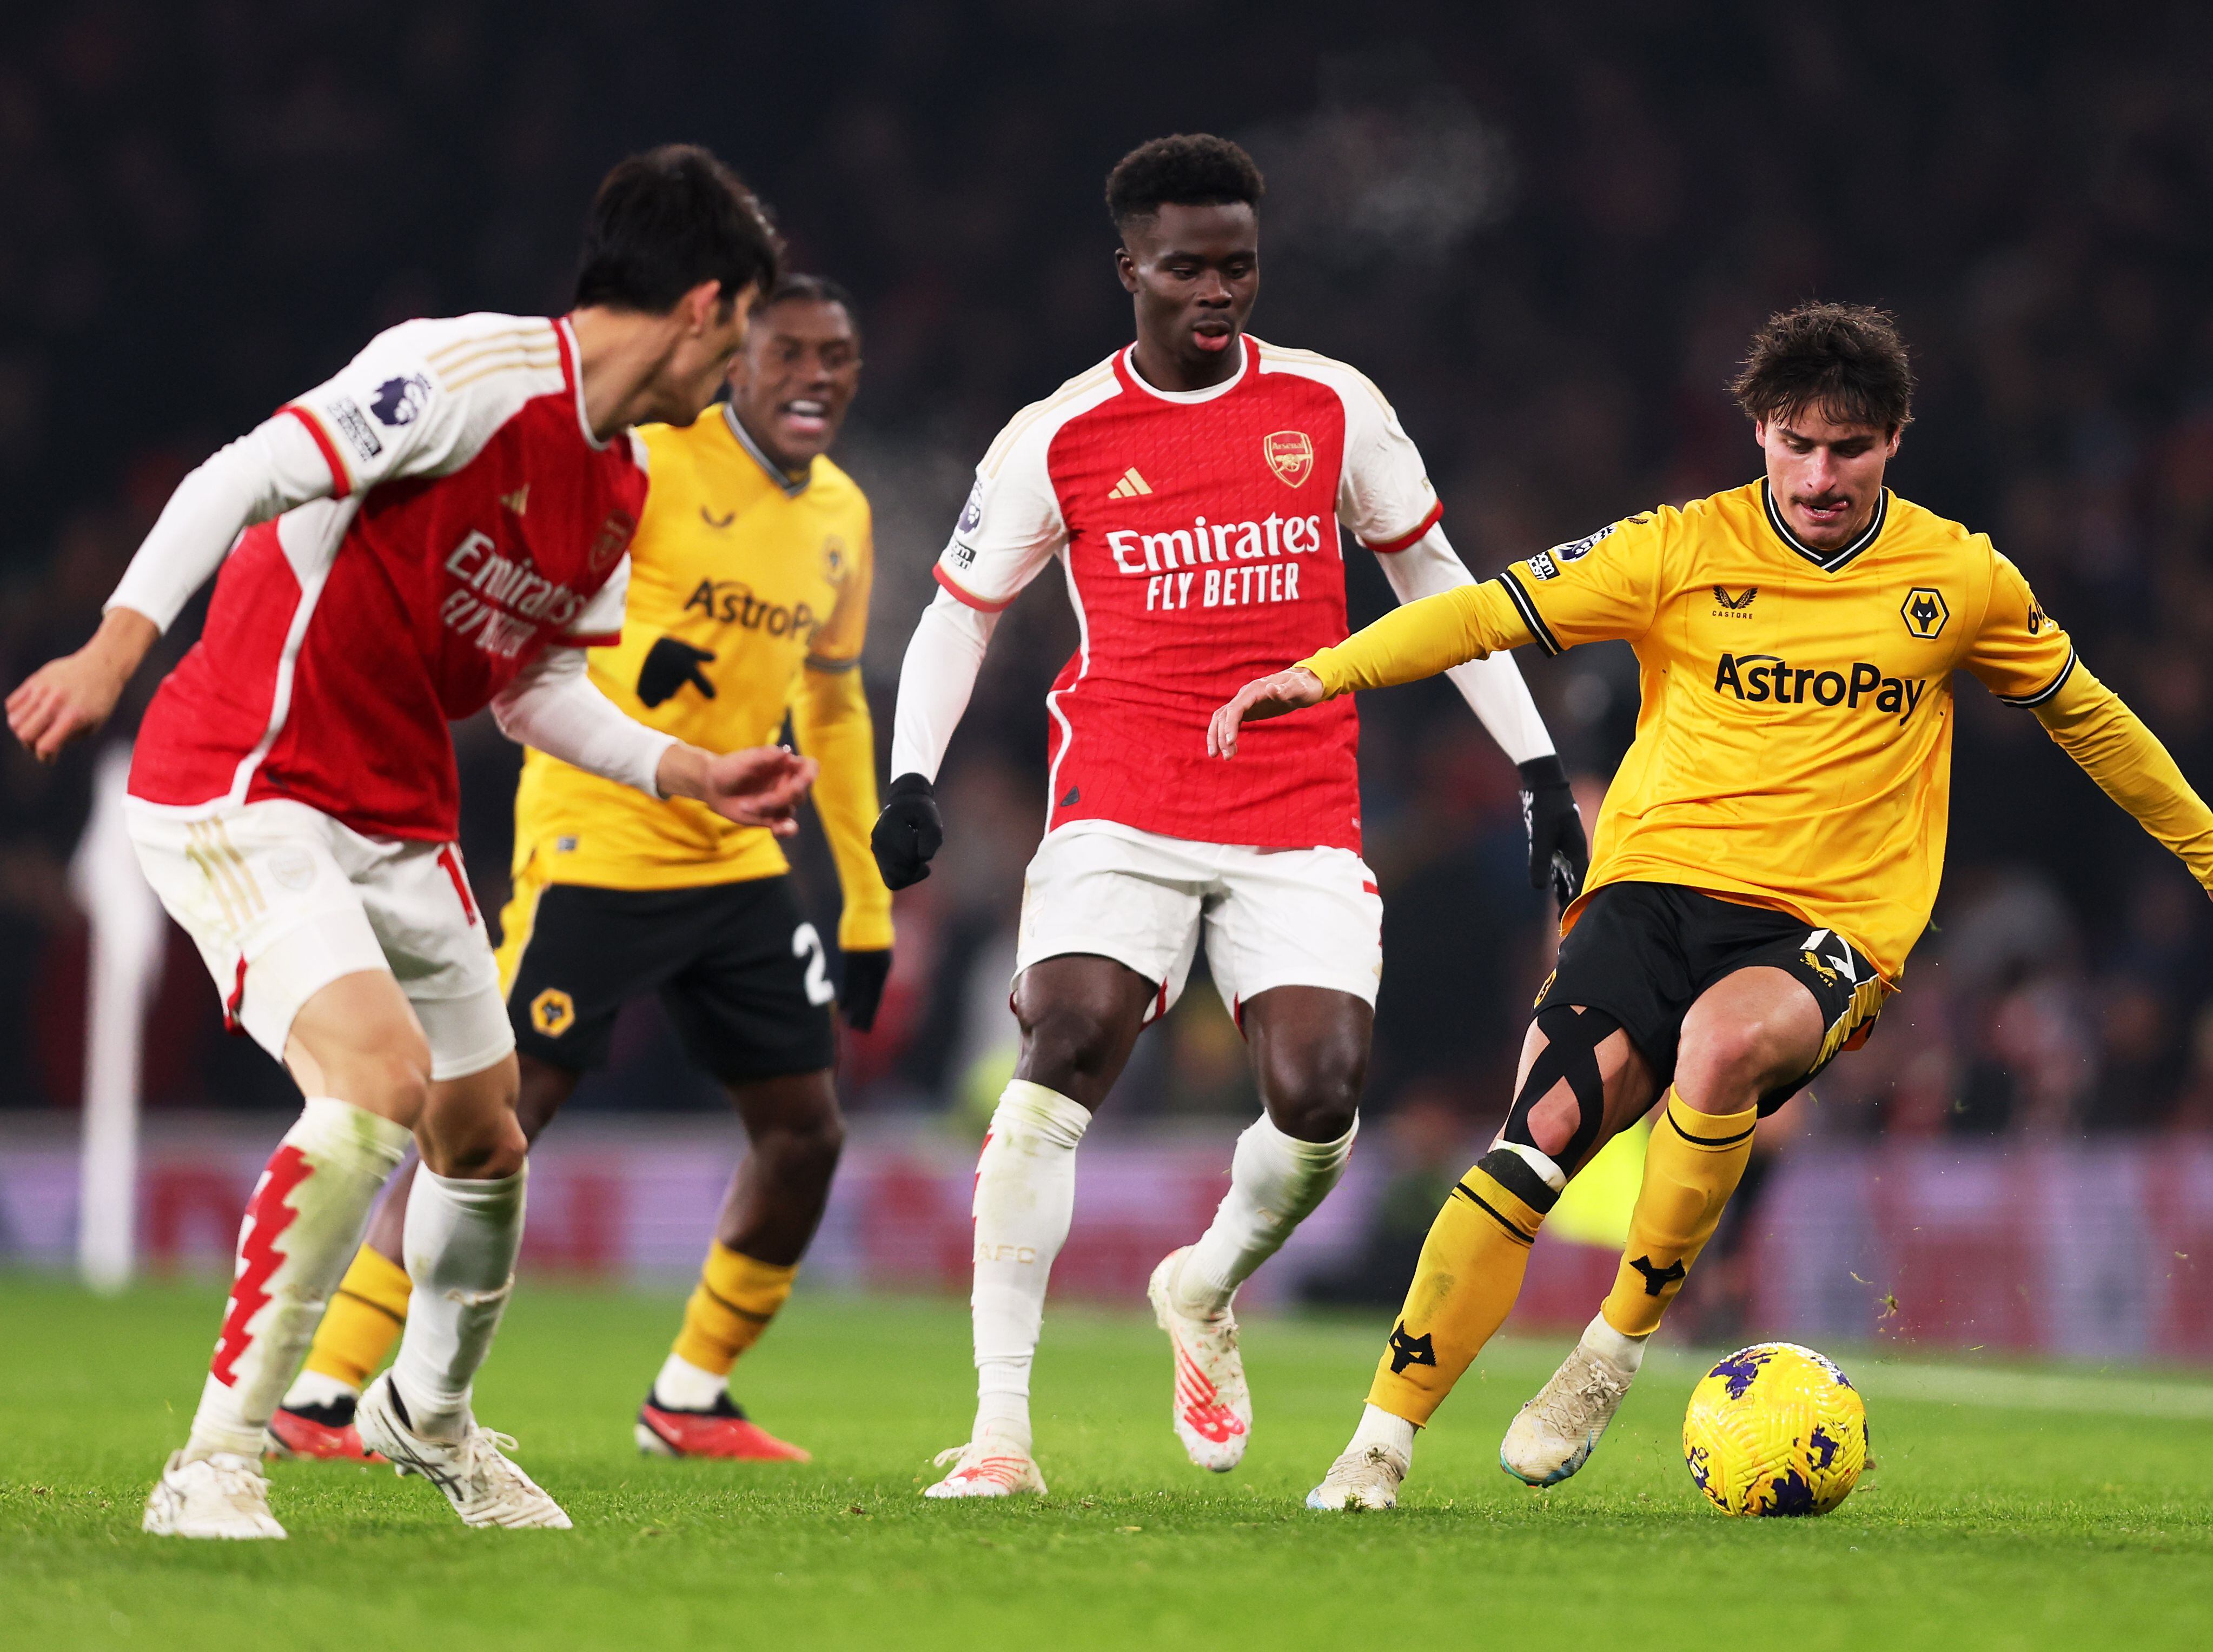 Liam Keen analysis: Wolves' defeat at Arsenal no surprise - they were due a tough afternoon